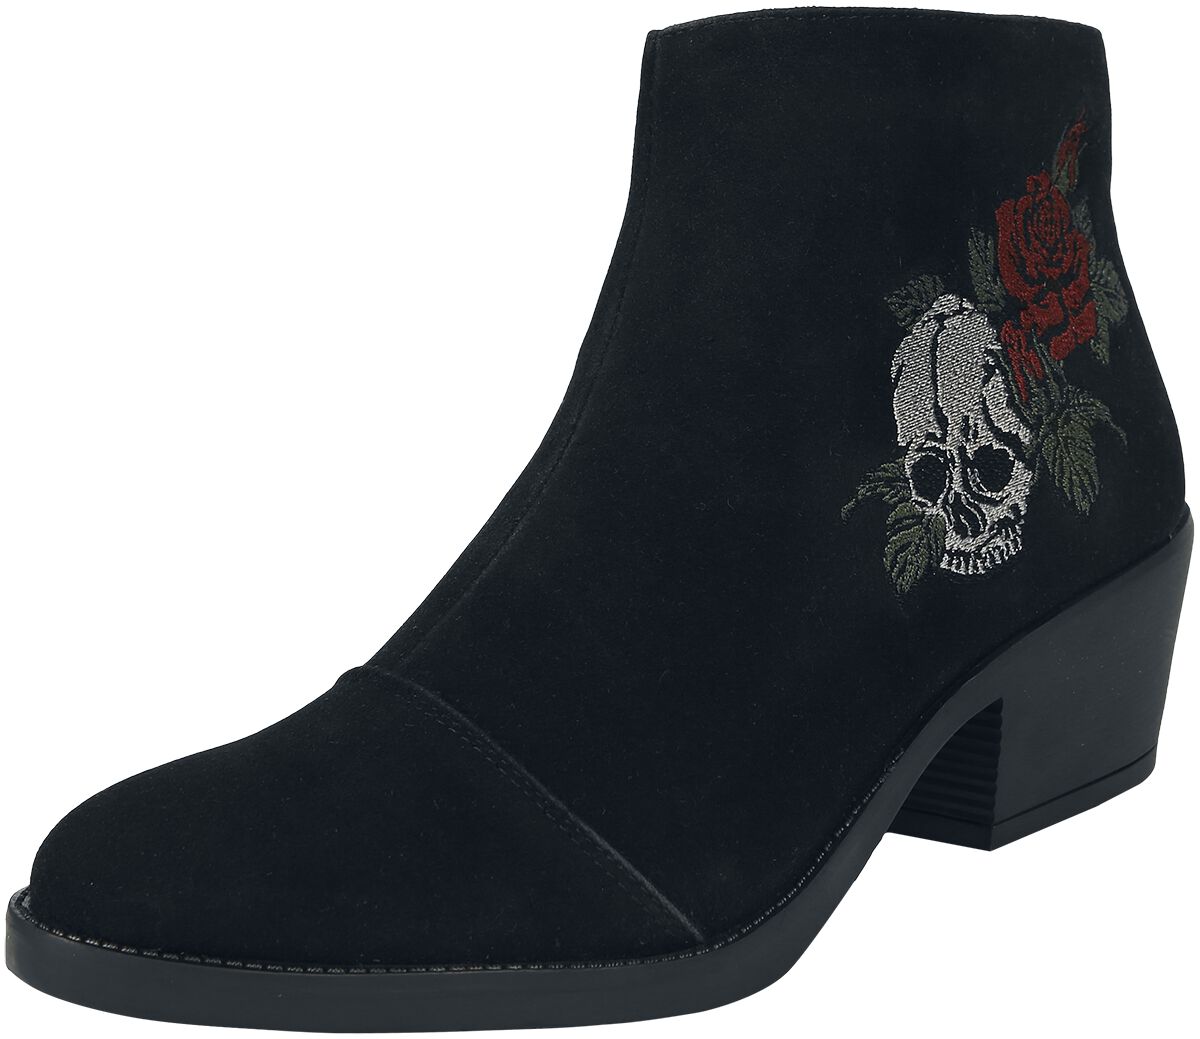 Rock Rebel by EMP Boot with Rose an Skull embroidery Stiefel schwarz in EU38